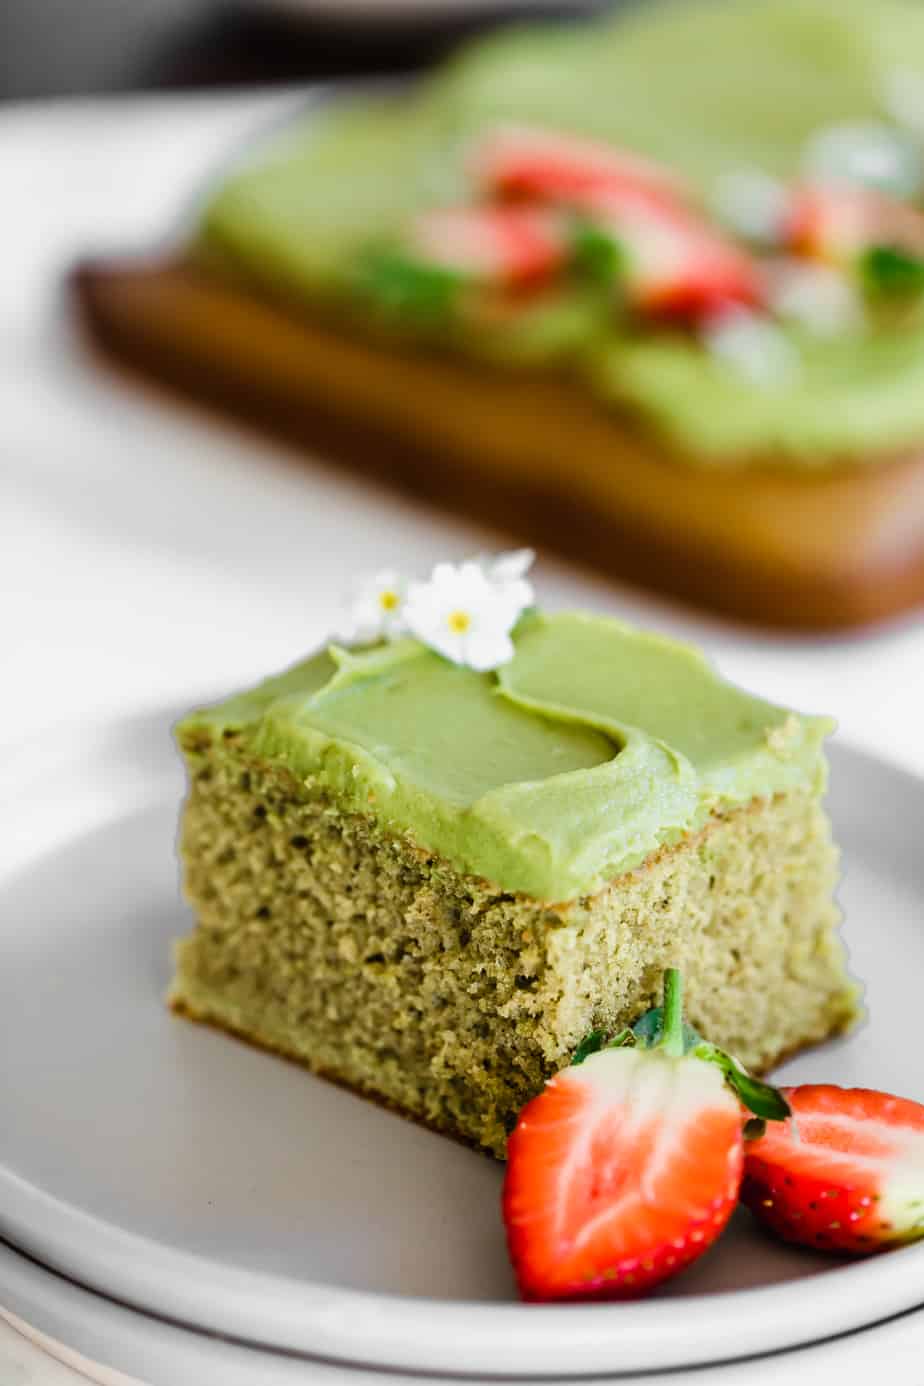 A square of matcha sheet cake with strawberries on a grey plate.